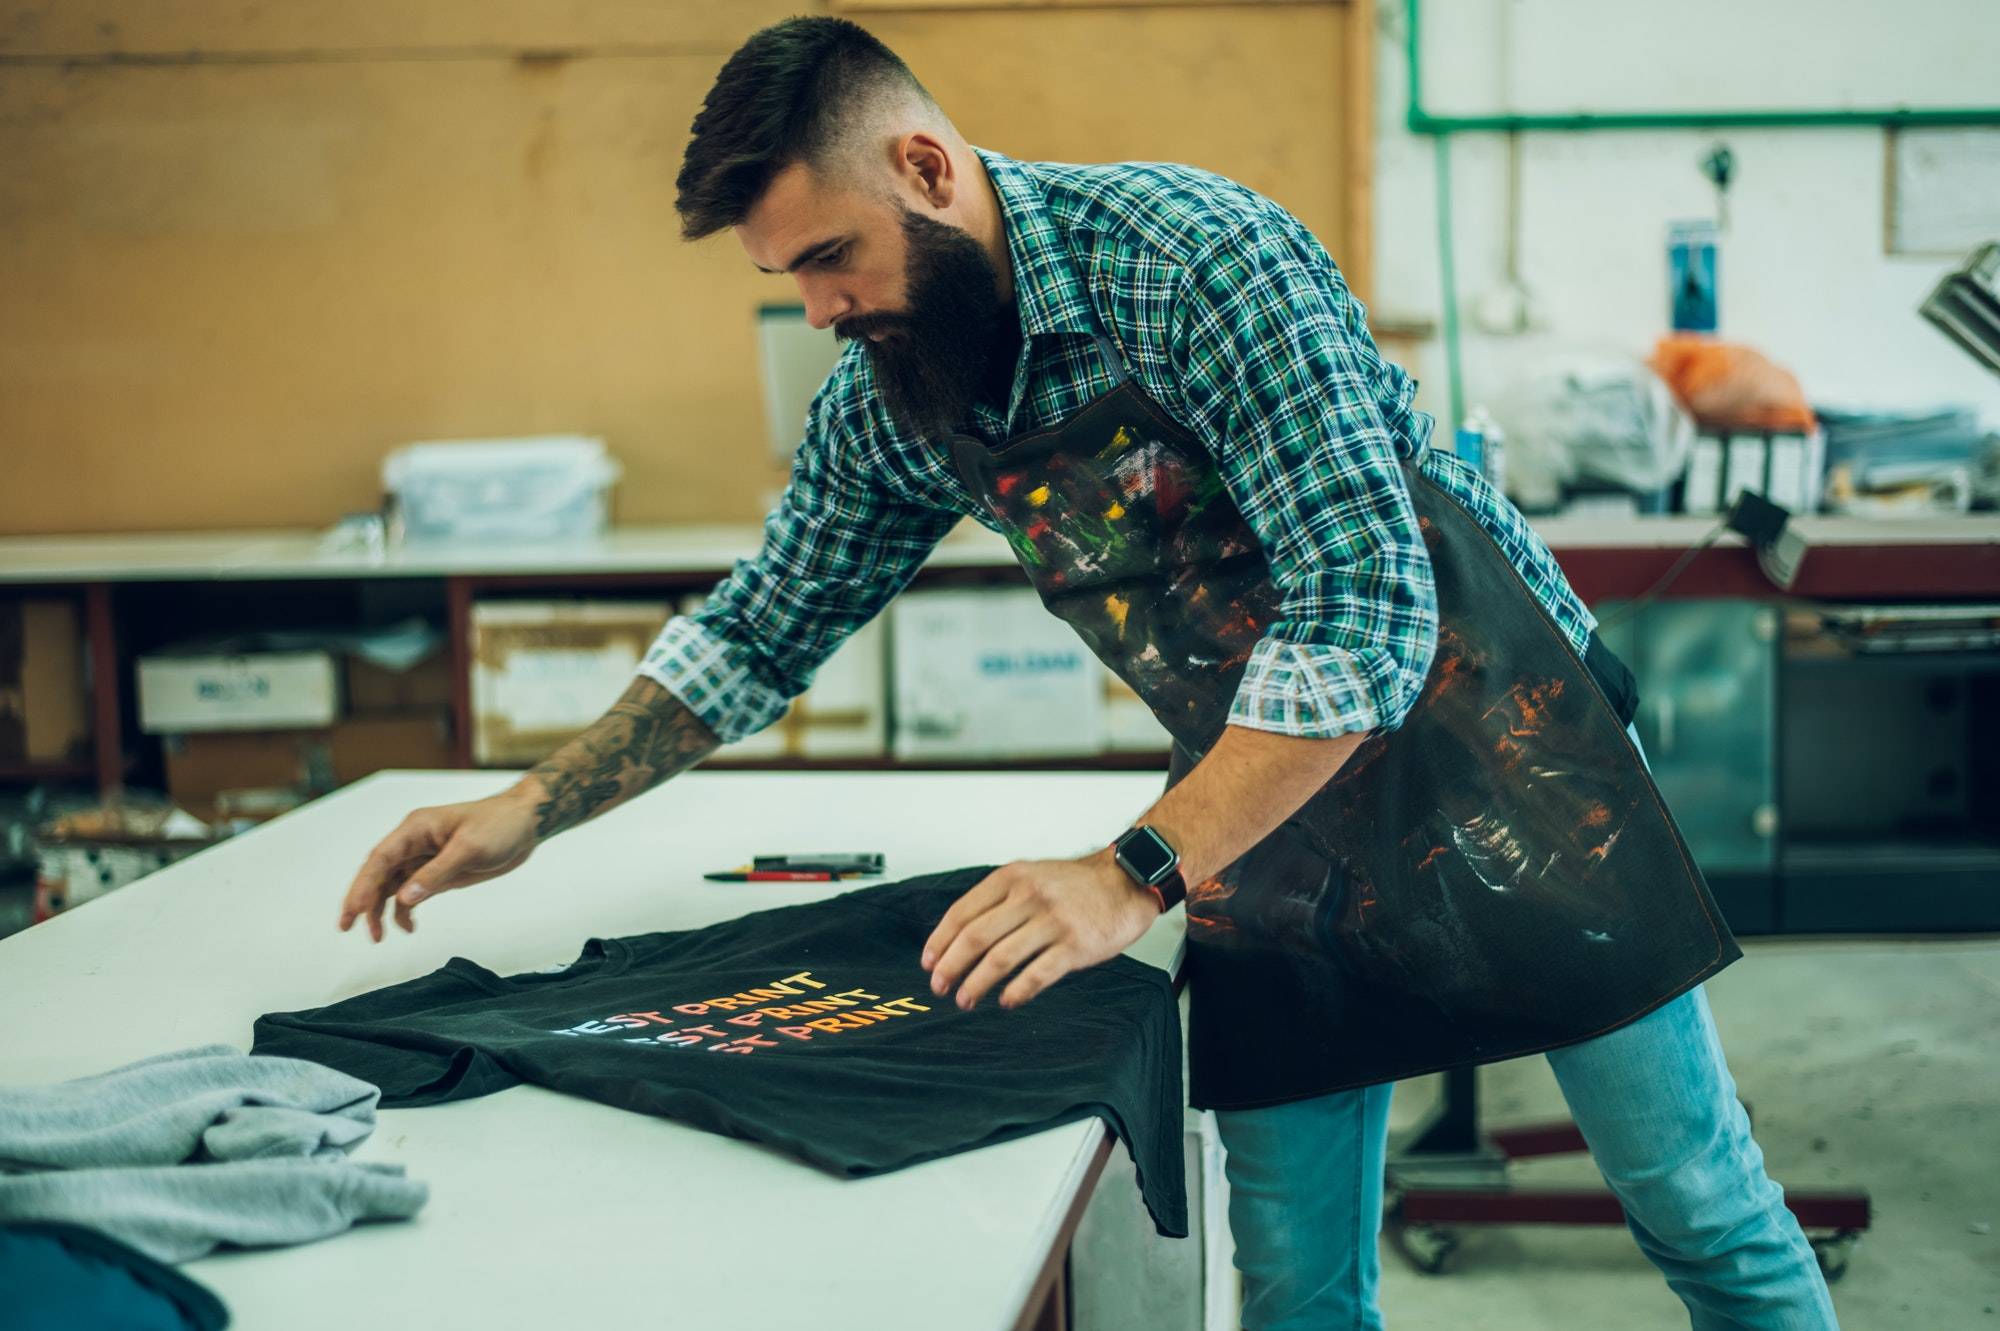 Male worker folding a fresh printed t shirt in a printing workshop